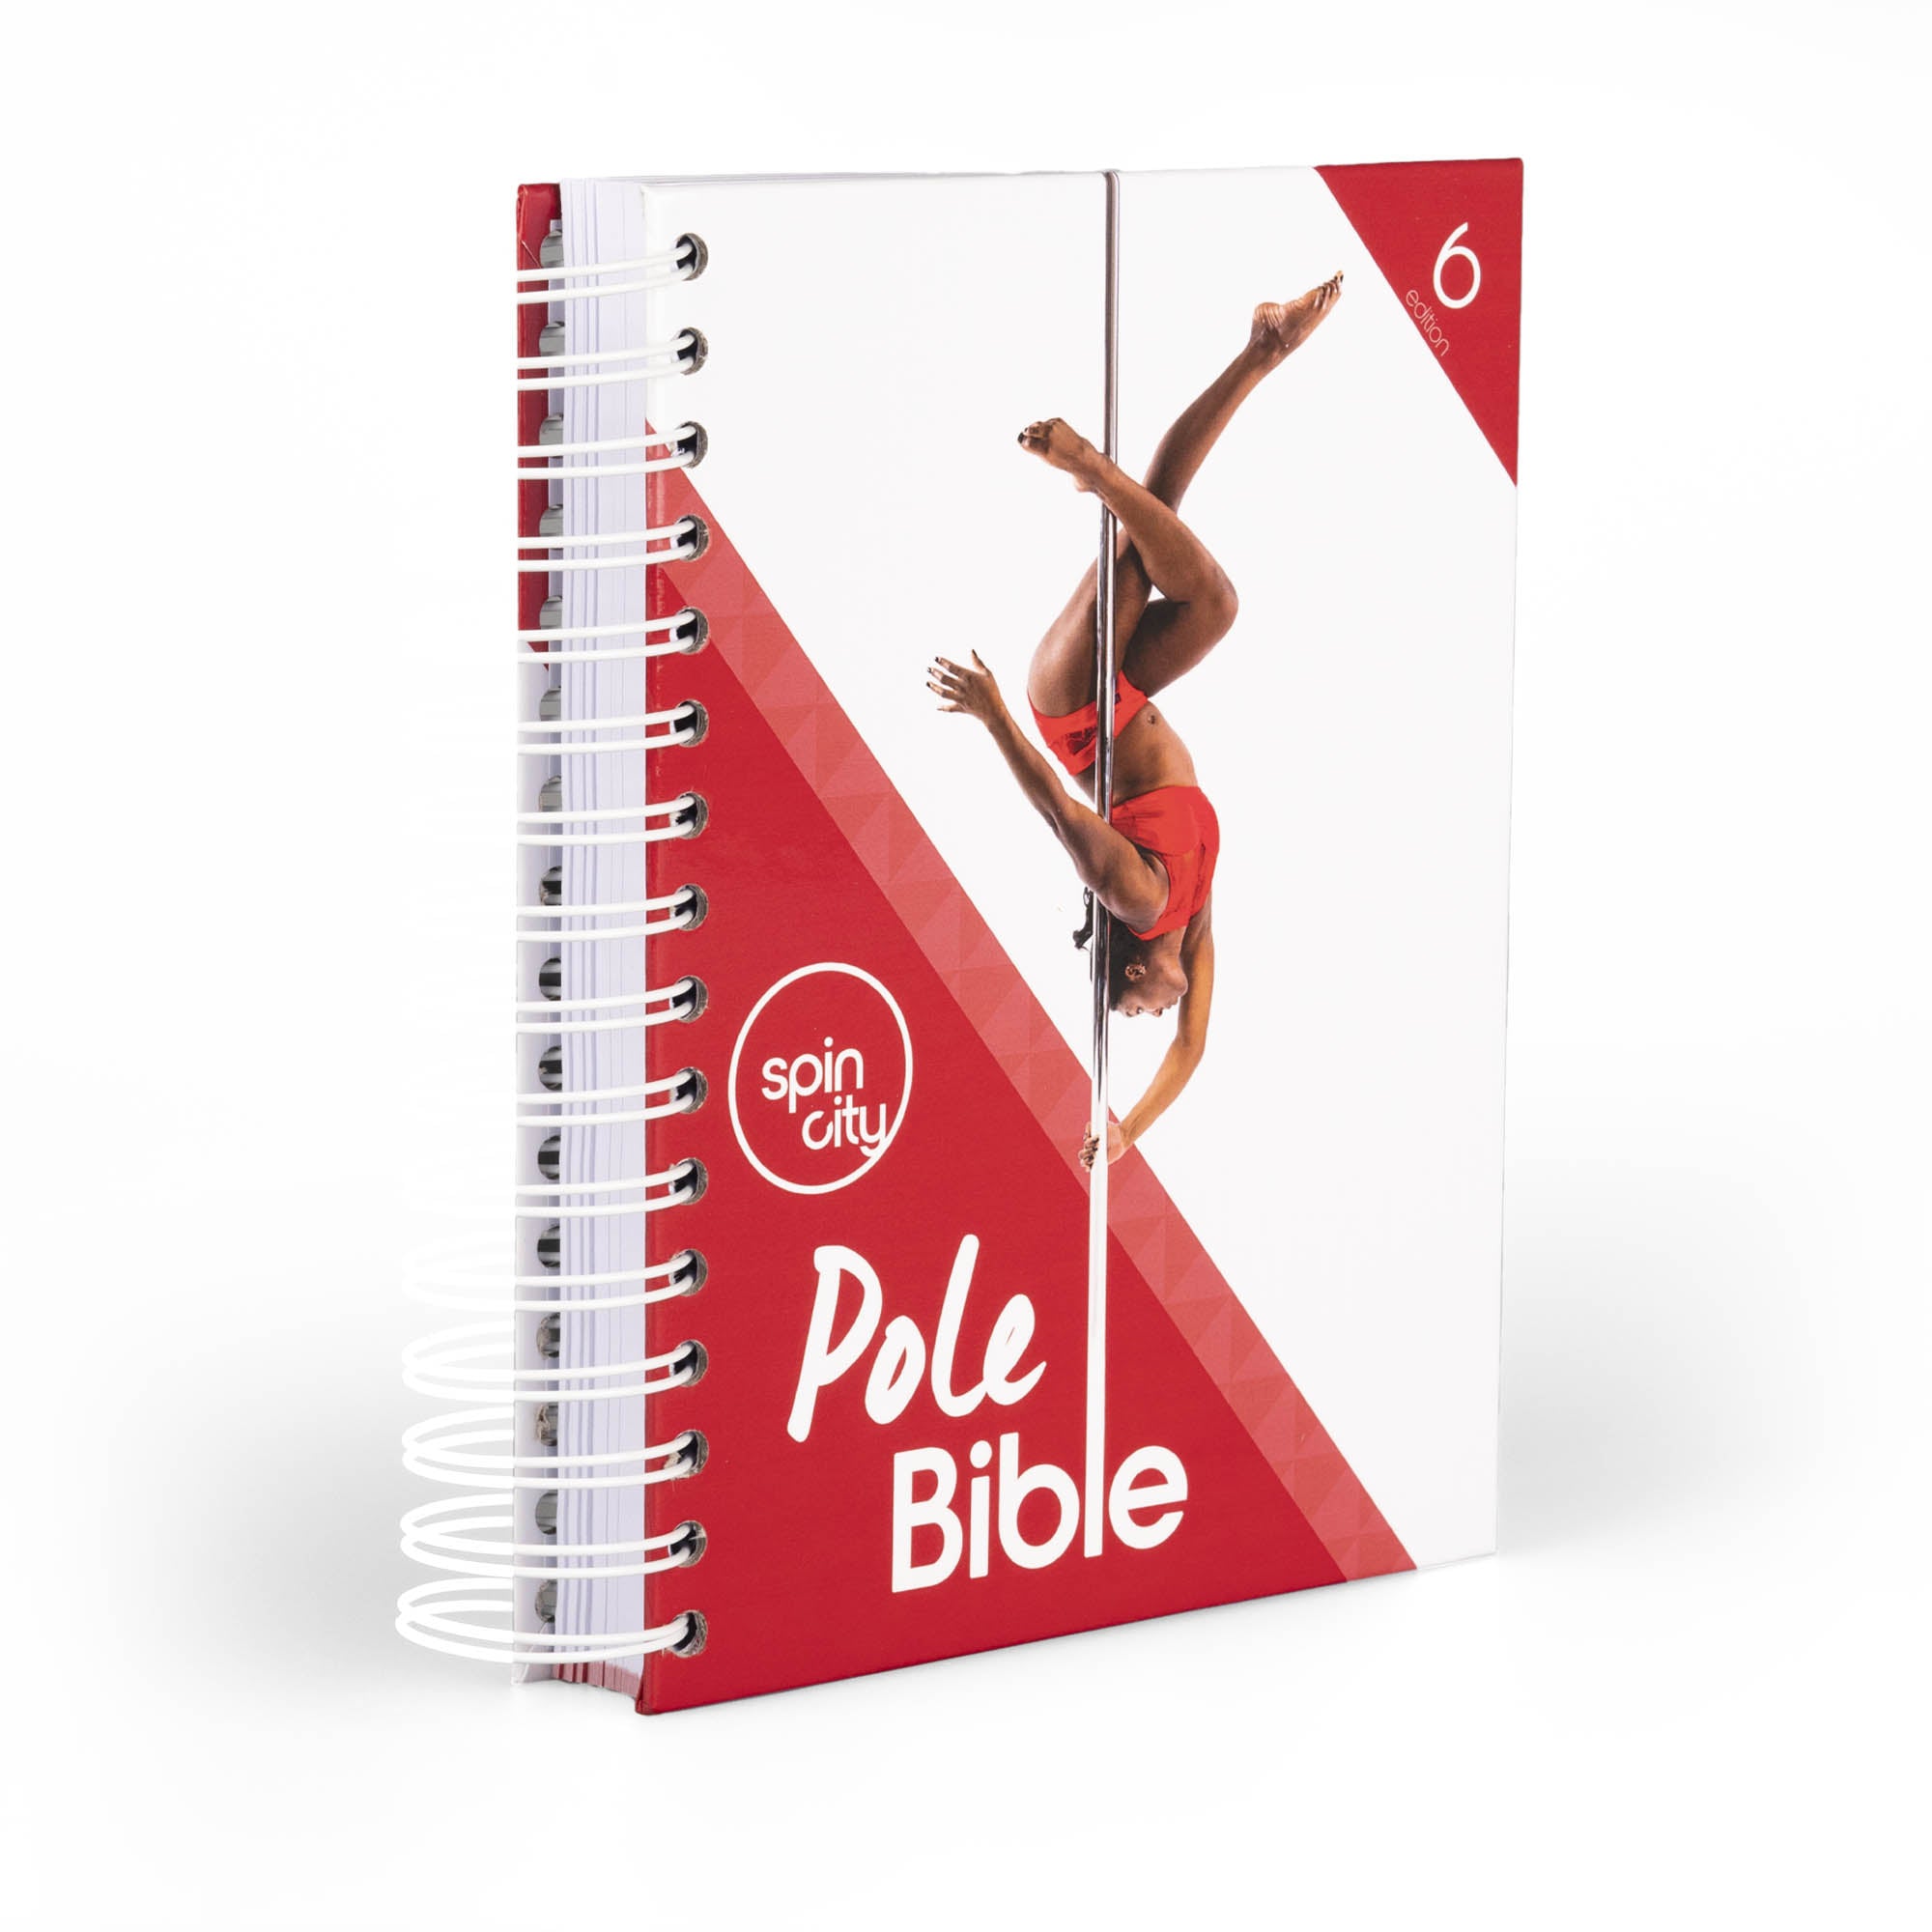 Pole bible edition 6 with a slight angle in white background